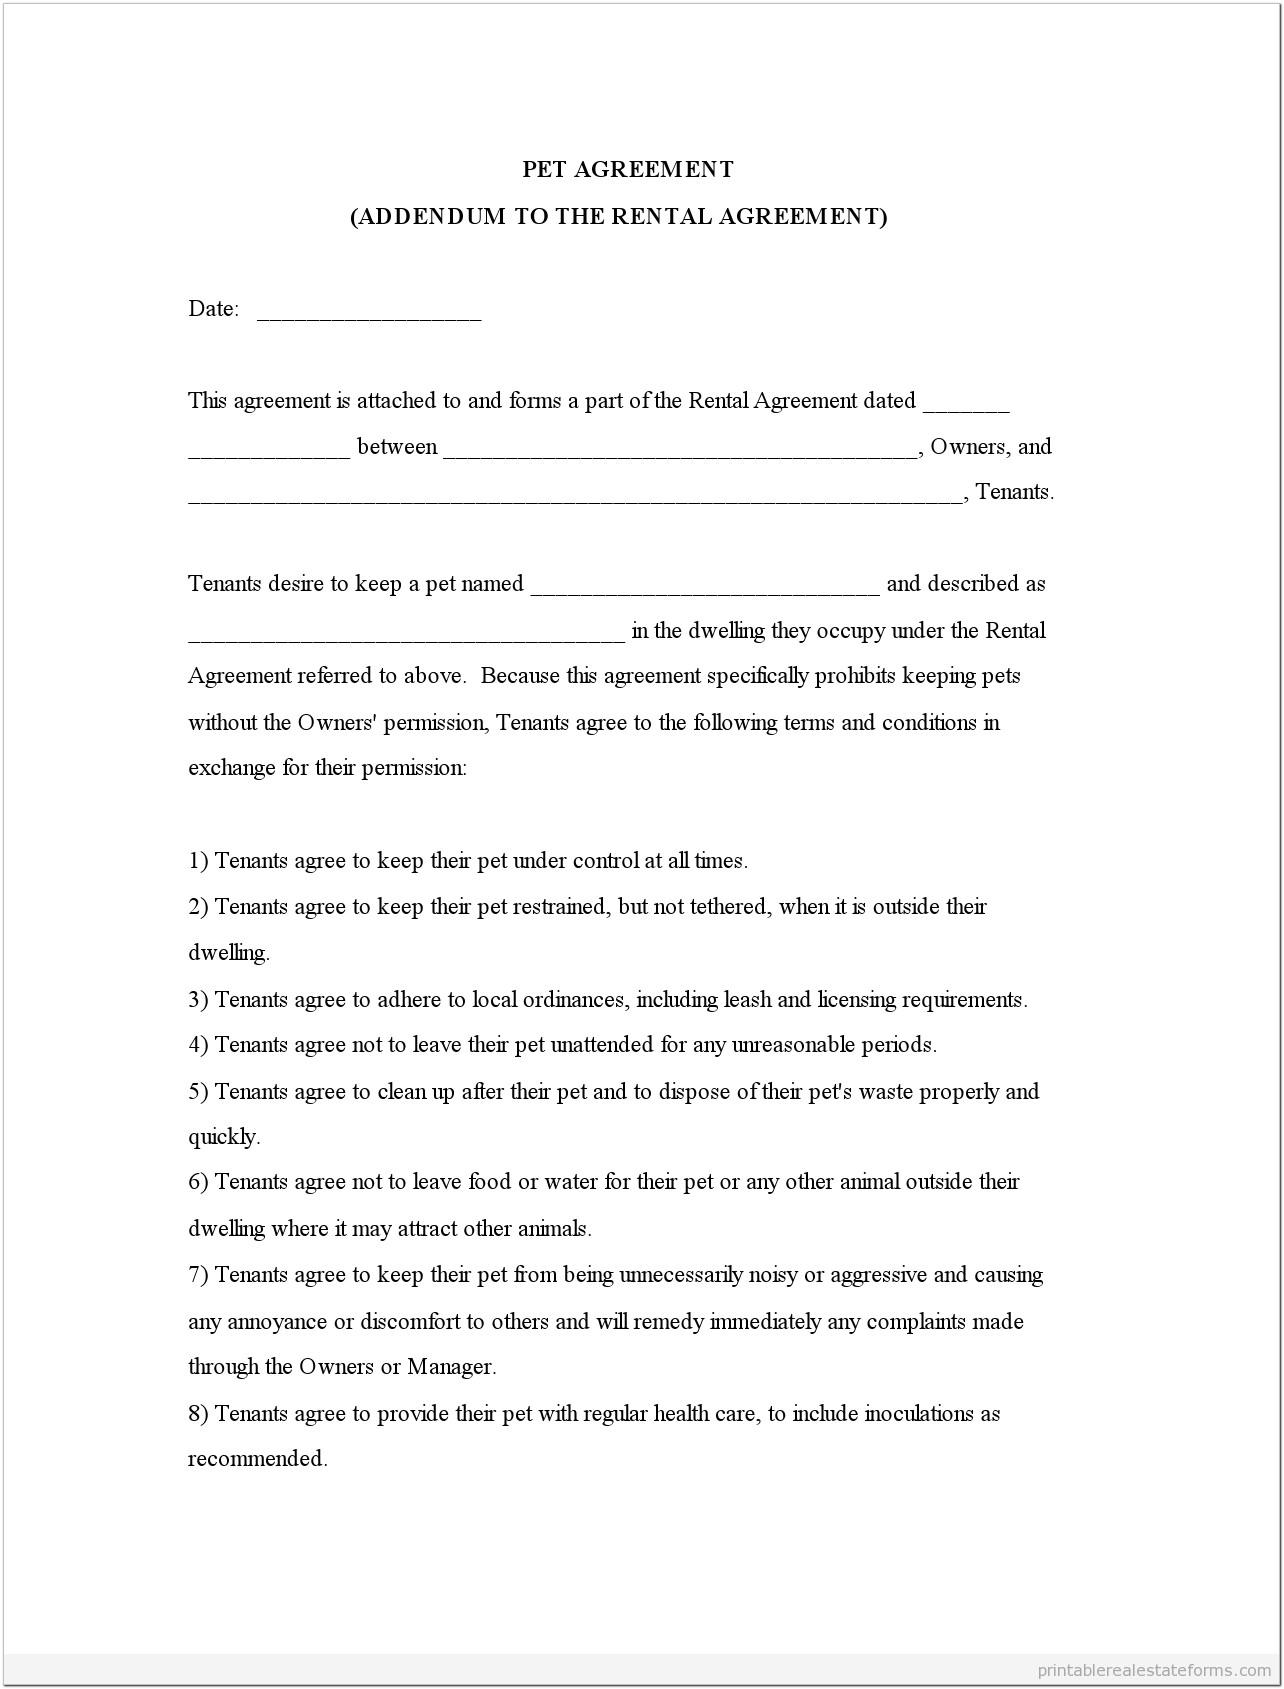 Addendum To Commercial Lease Agreement Template